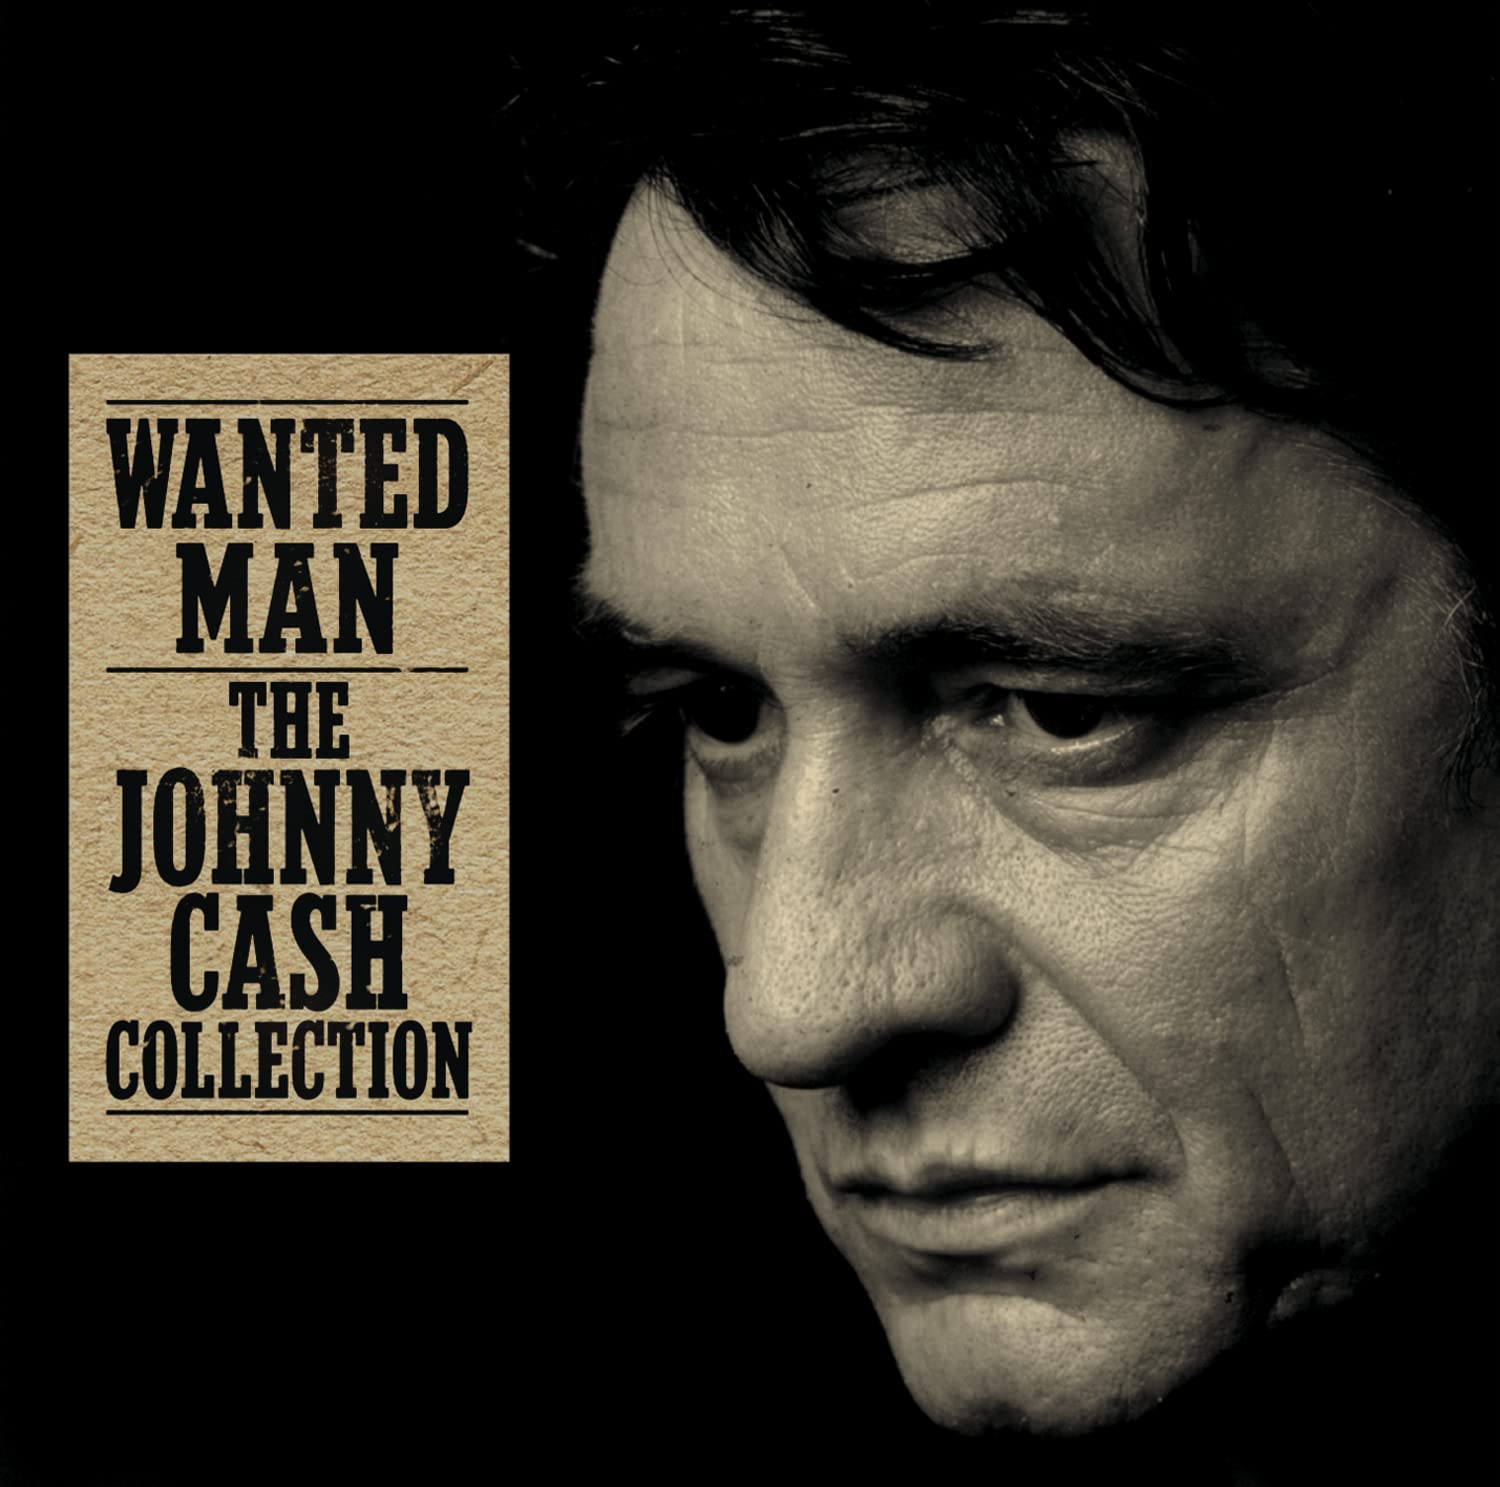 The Wanted Man vinyl memories return to this classic prison song co-written by Bob Dylan and Johnny Cash. Ten years prior when he first performed at San Quentin prison, Cash began a series of prison concerts that would continue throughout the remainder of his career.